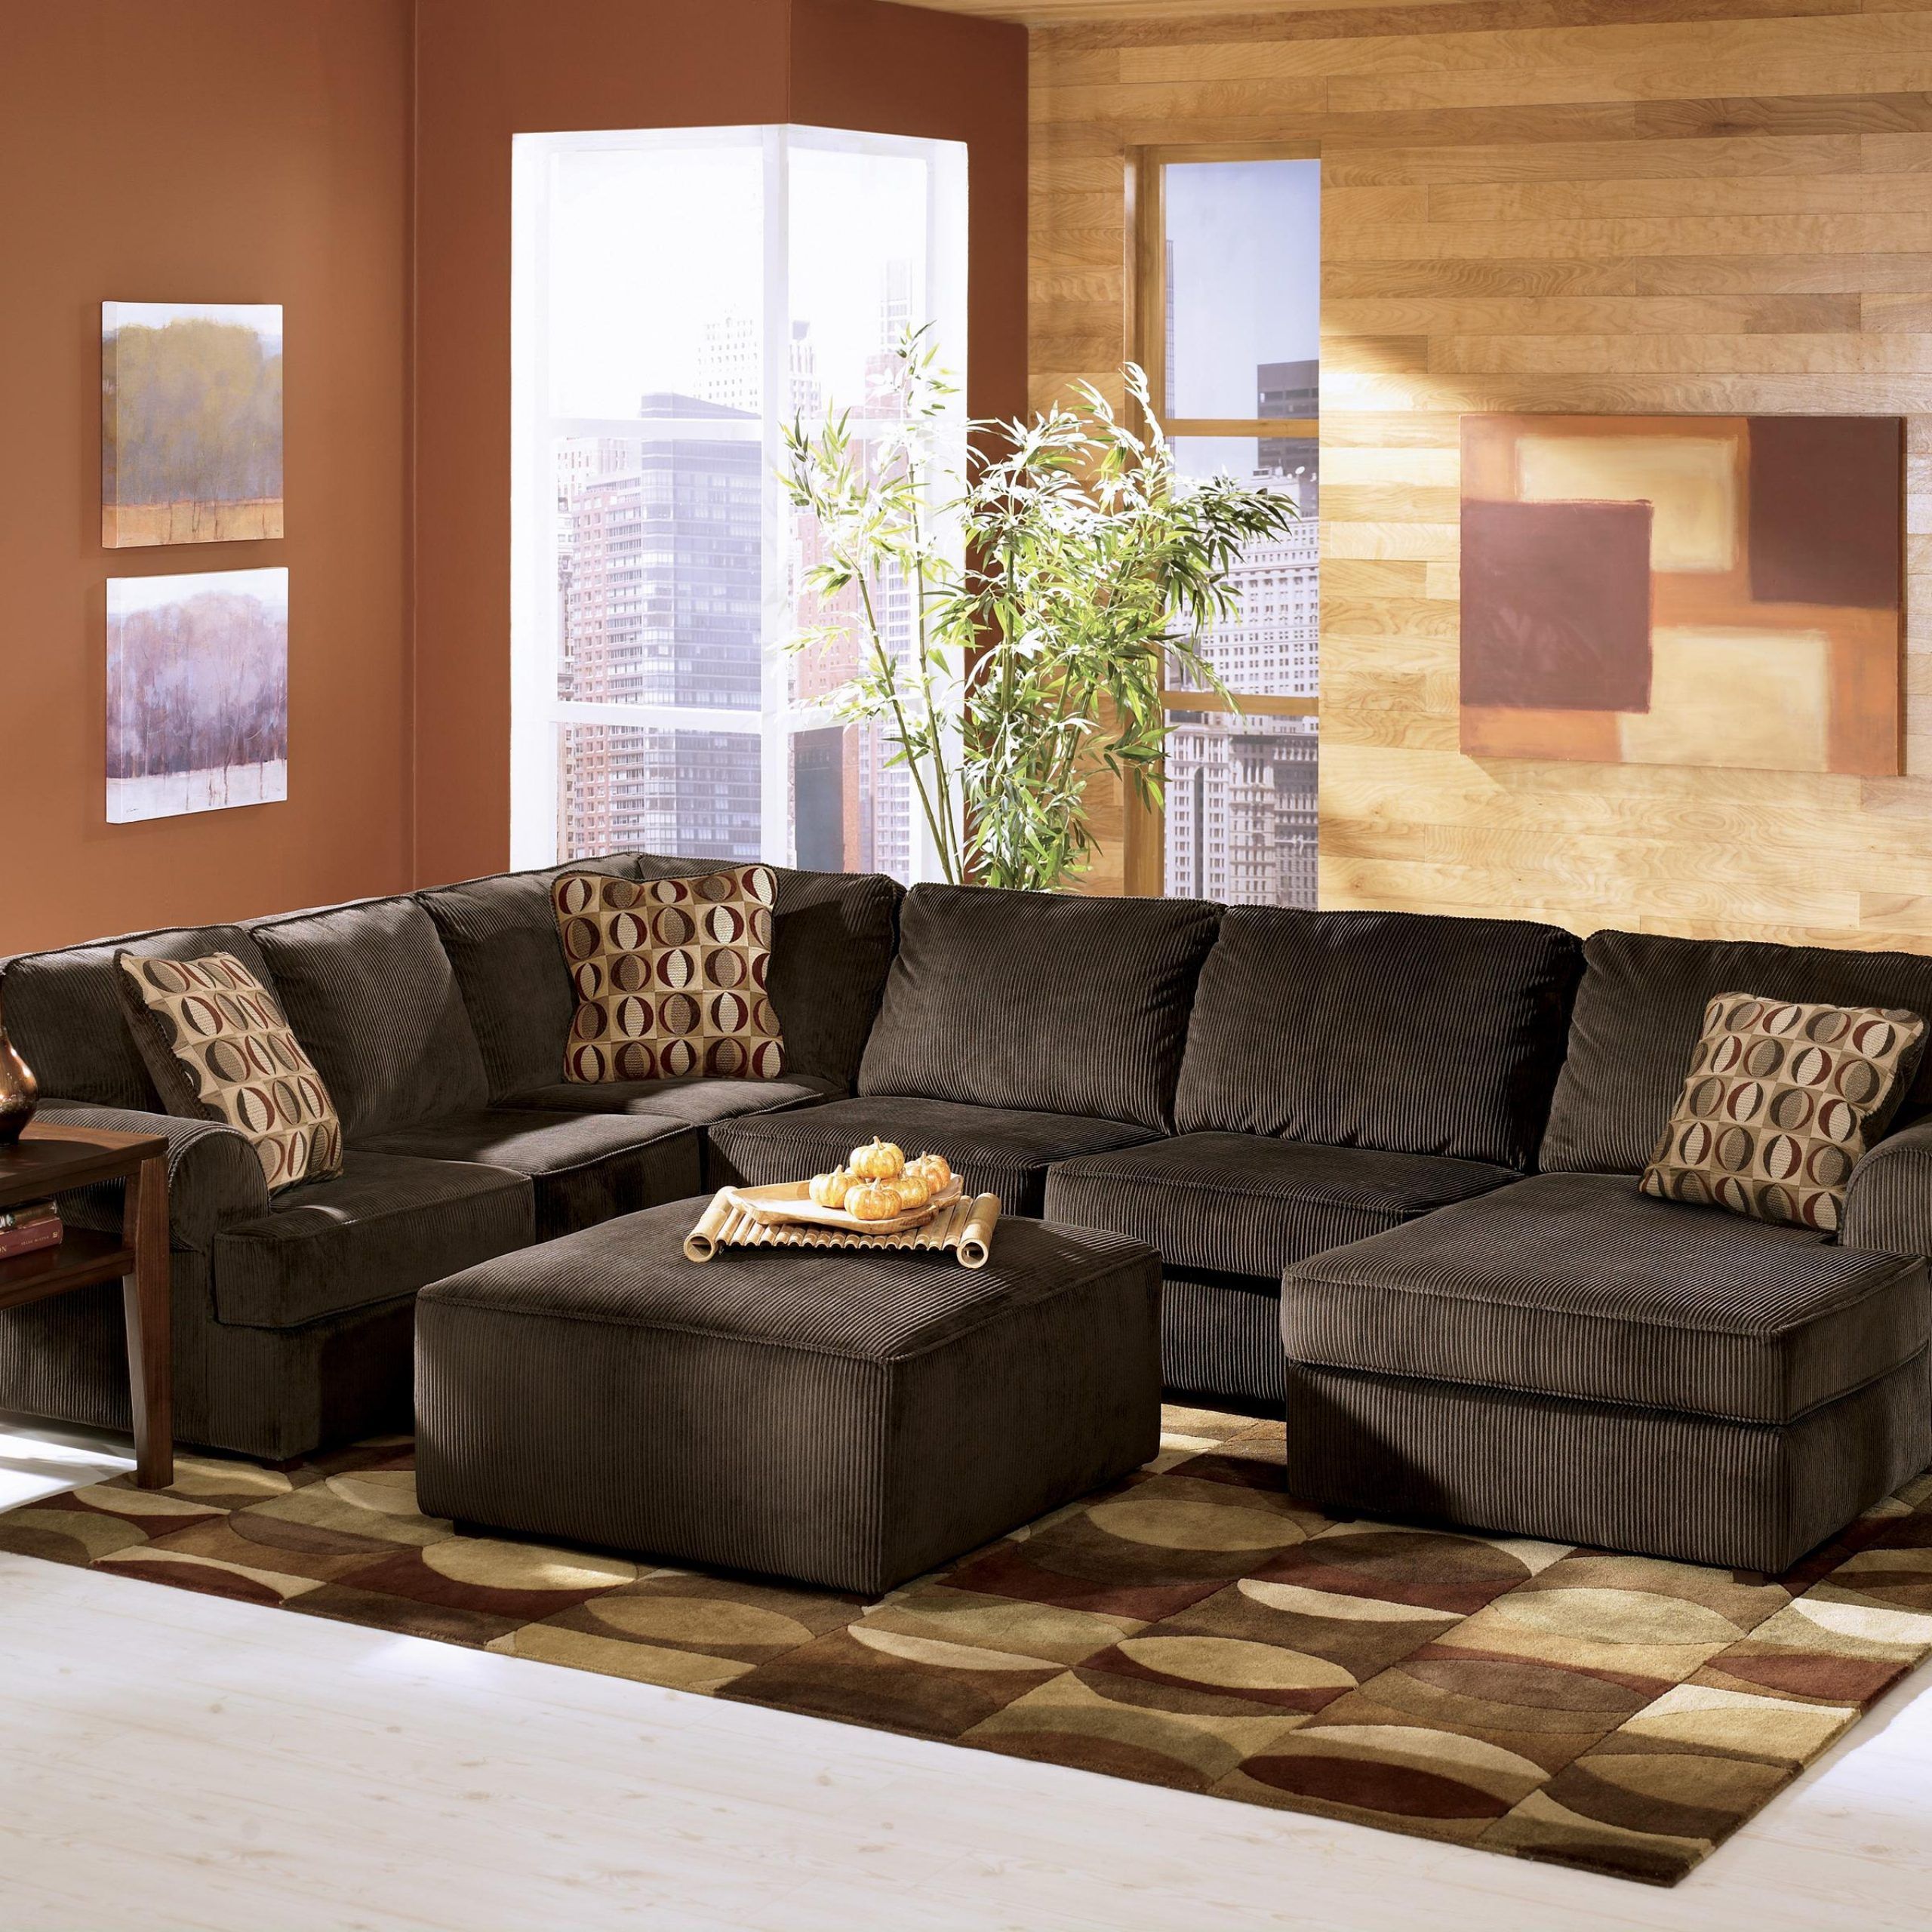 Vista – Chocolate (68404)ashley Furniture – Del Sol Regarding 2pc Luxurious And Plush Corduroy Sectional Sofas Brown (View 15 of 15)